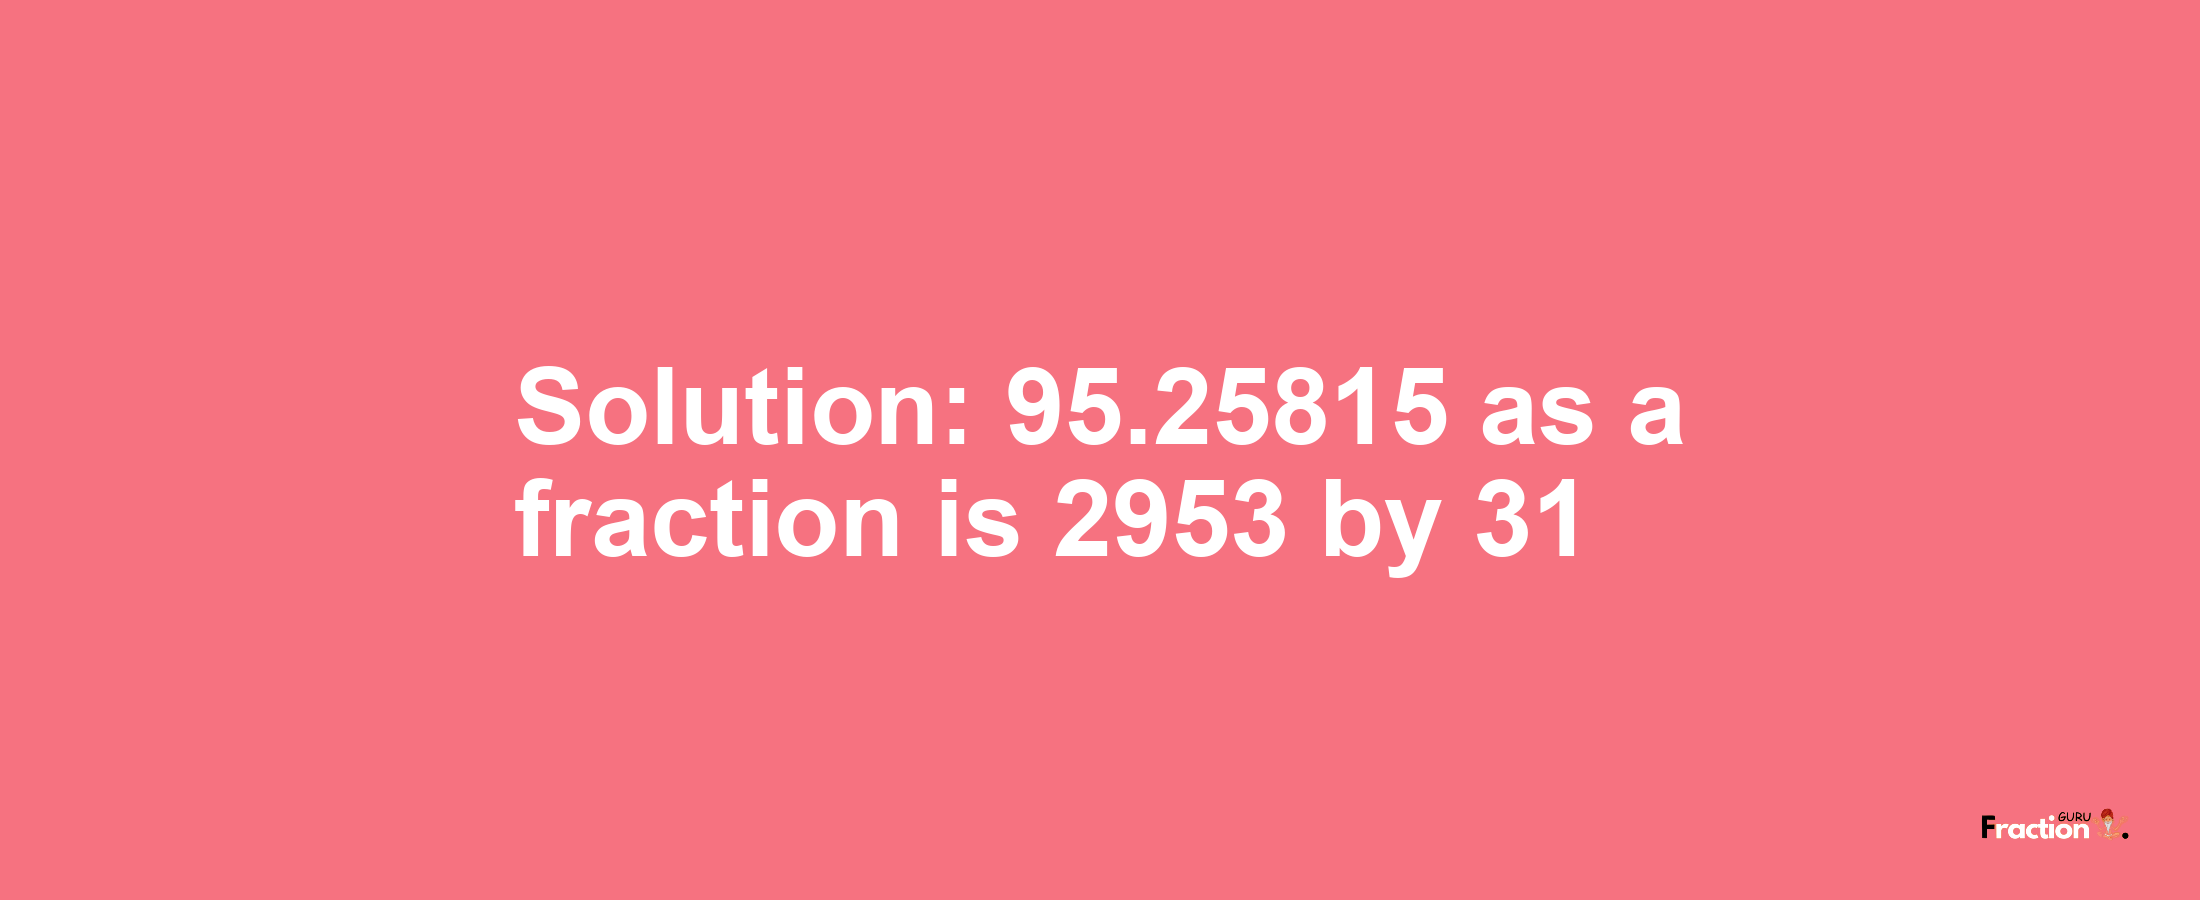 Solution:95.25815 as a fraction is 2953/31